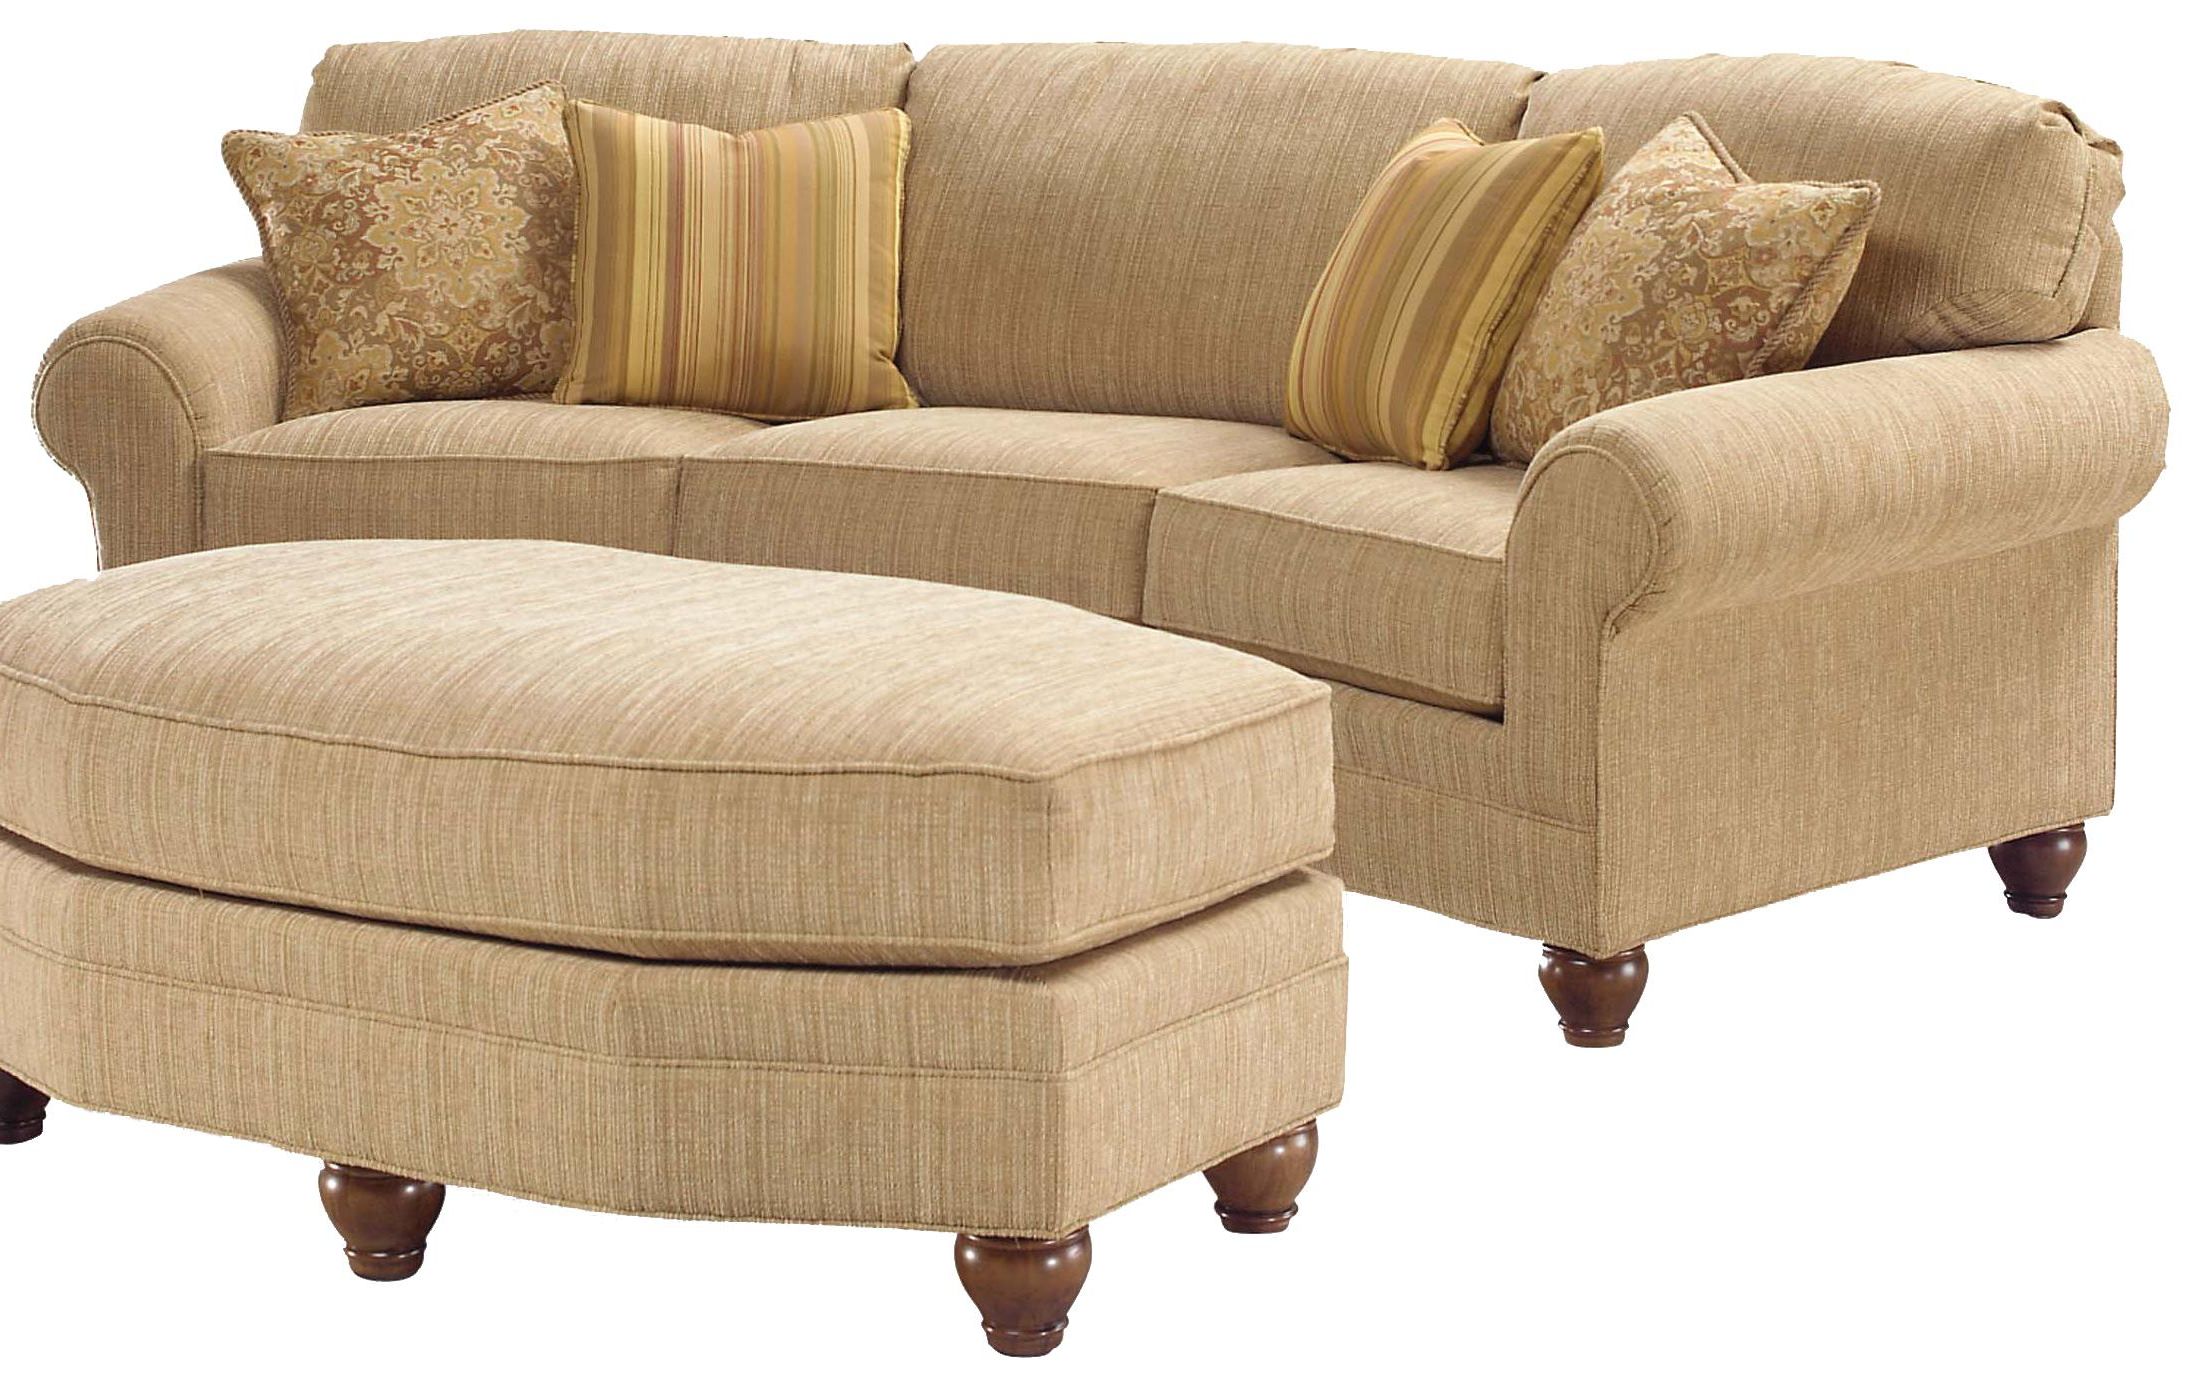 Upper Room Home Furnishings Regarding Most Current Sofas With Curved Arms (View 13 of 15)